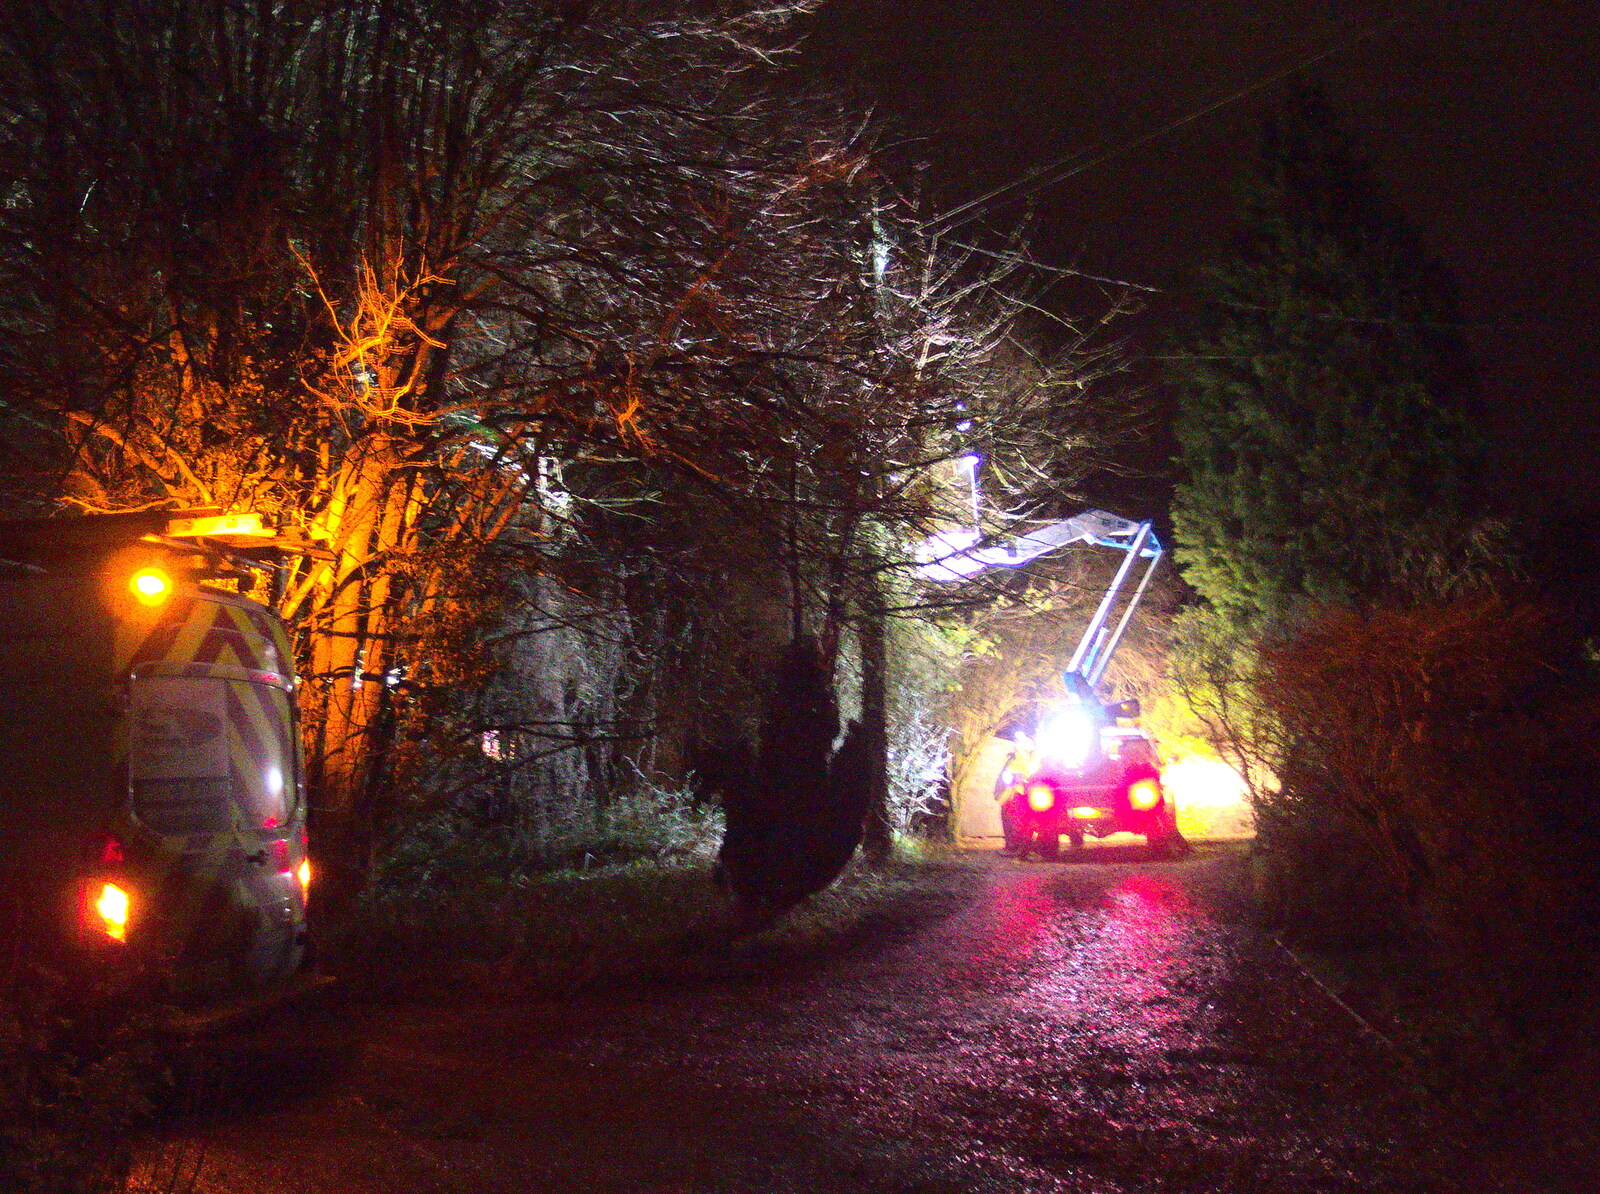 UK Power Networks are out with their cherry picker from Southwark, Norwich, and a Power Cut, London, Norfolk and Suffolk - 12th December 2015